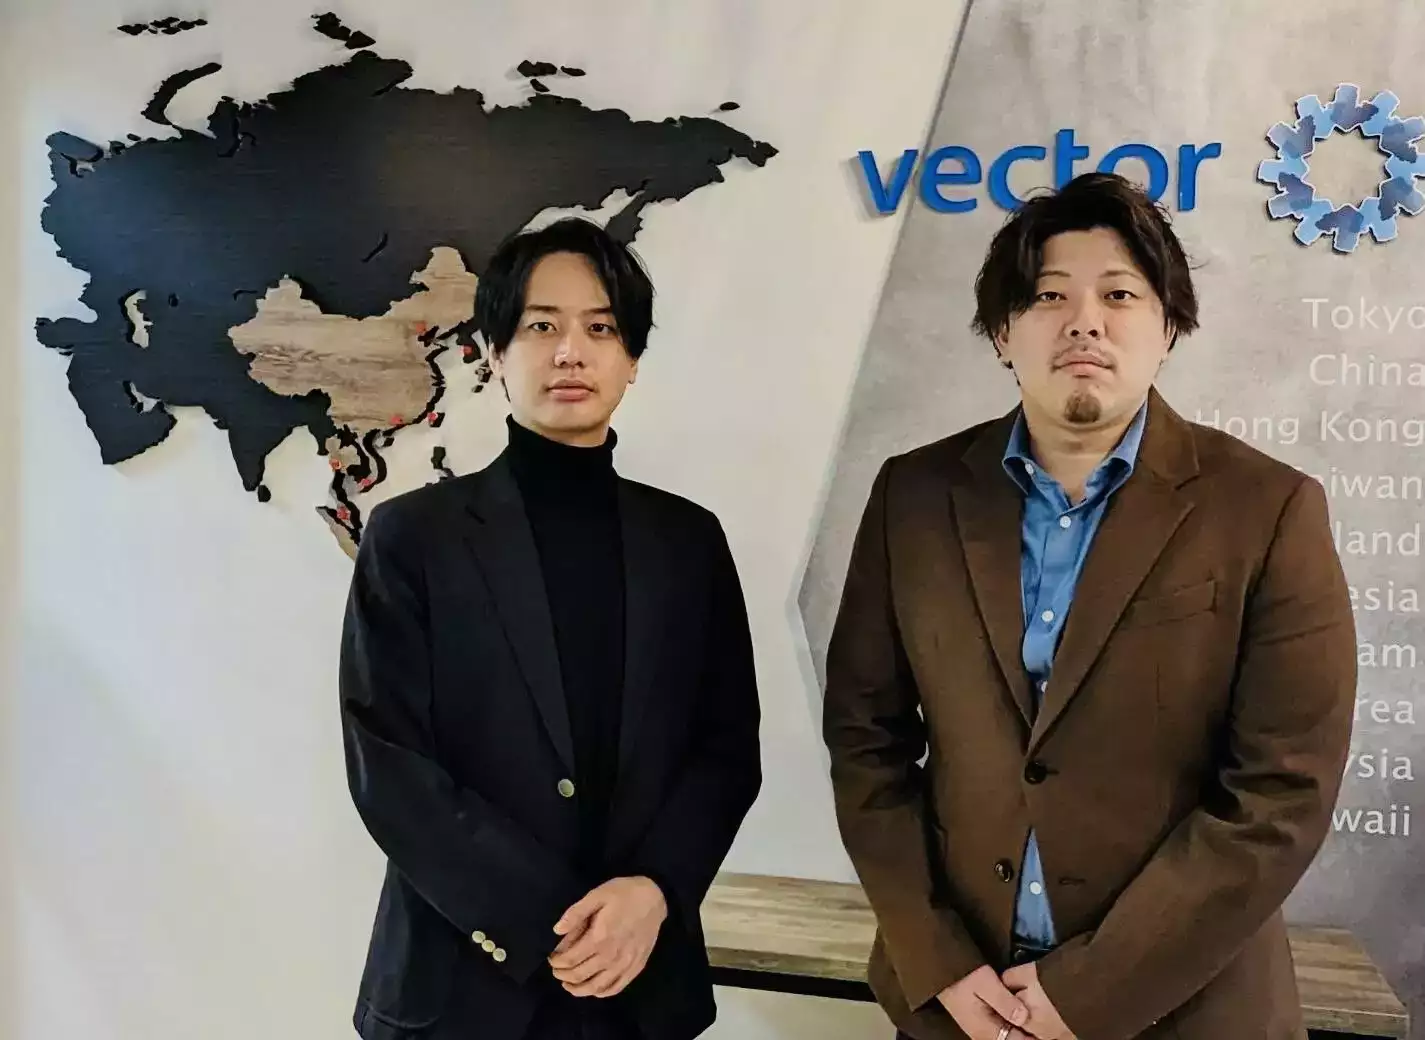 Japan's New MEO Algorithm Technology Helps Taiwan's Merchants to Get Their Information on the Map